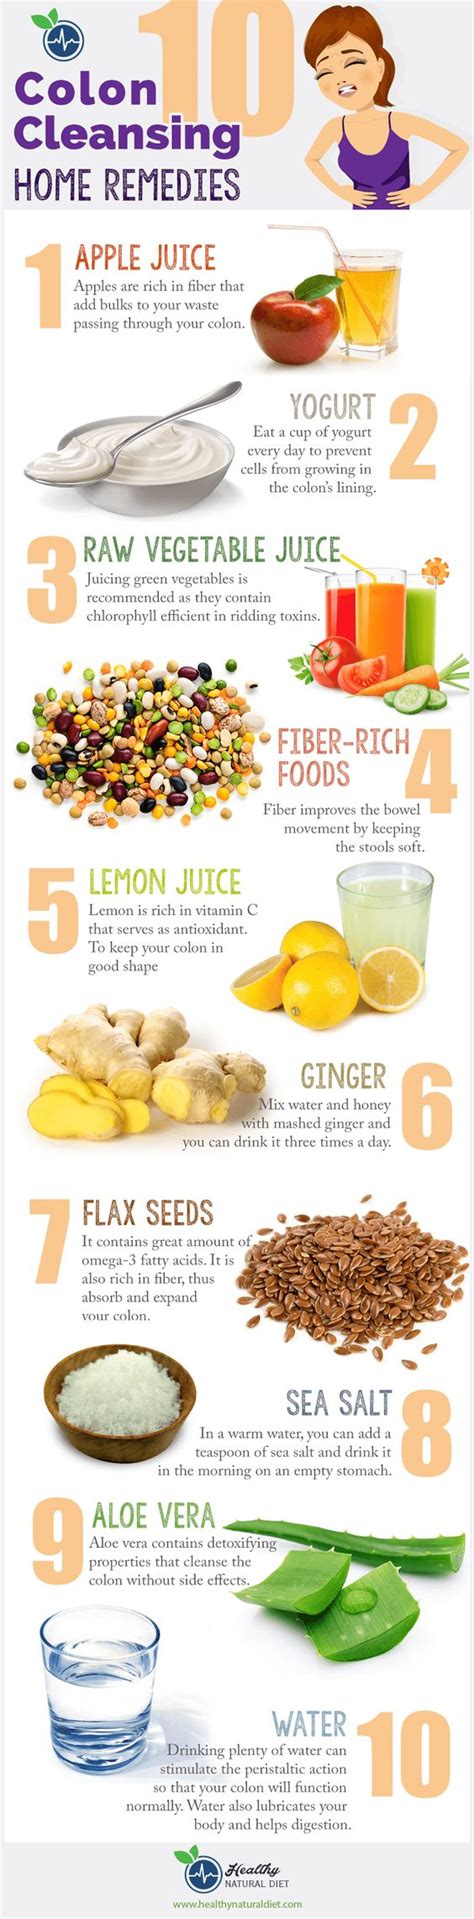 10 Powerful Colon Cleanse Home Remedies An Infographic Bowtrol